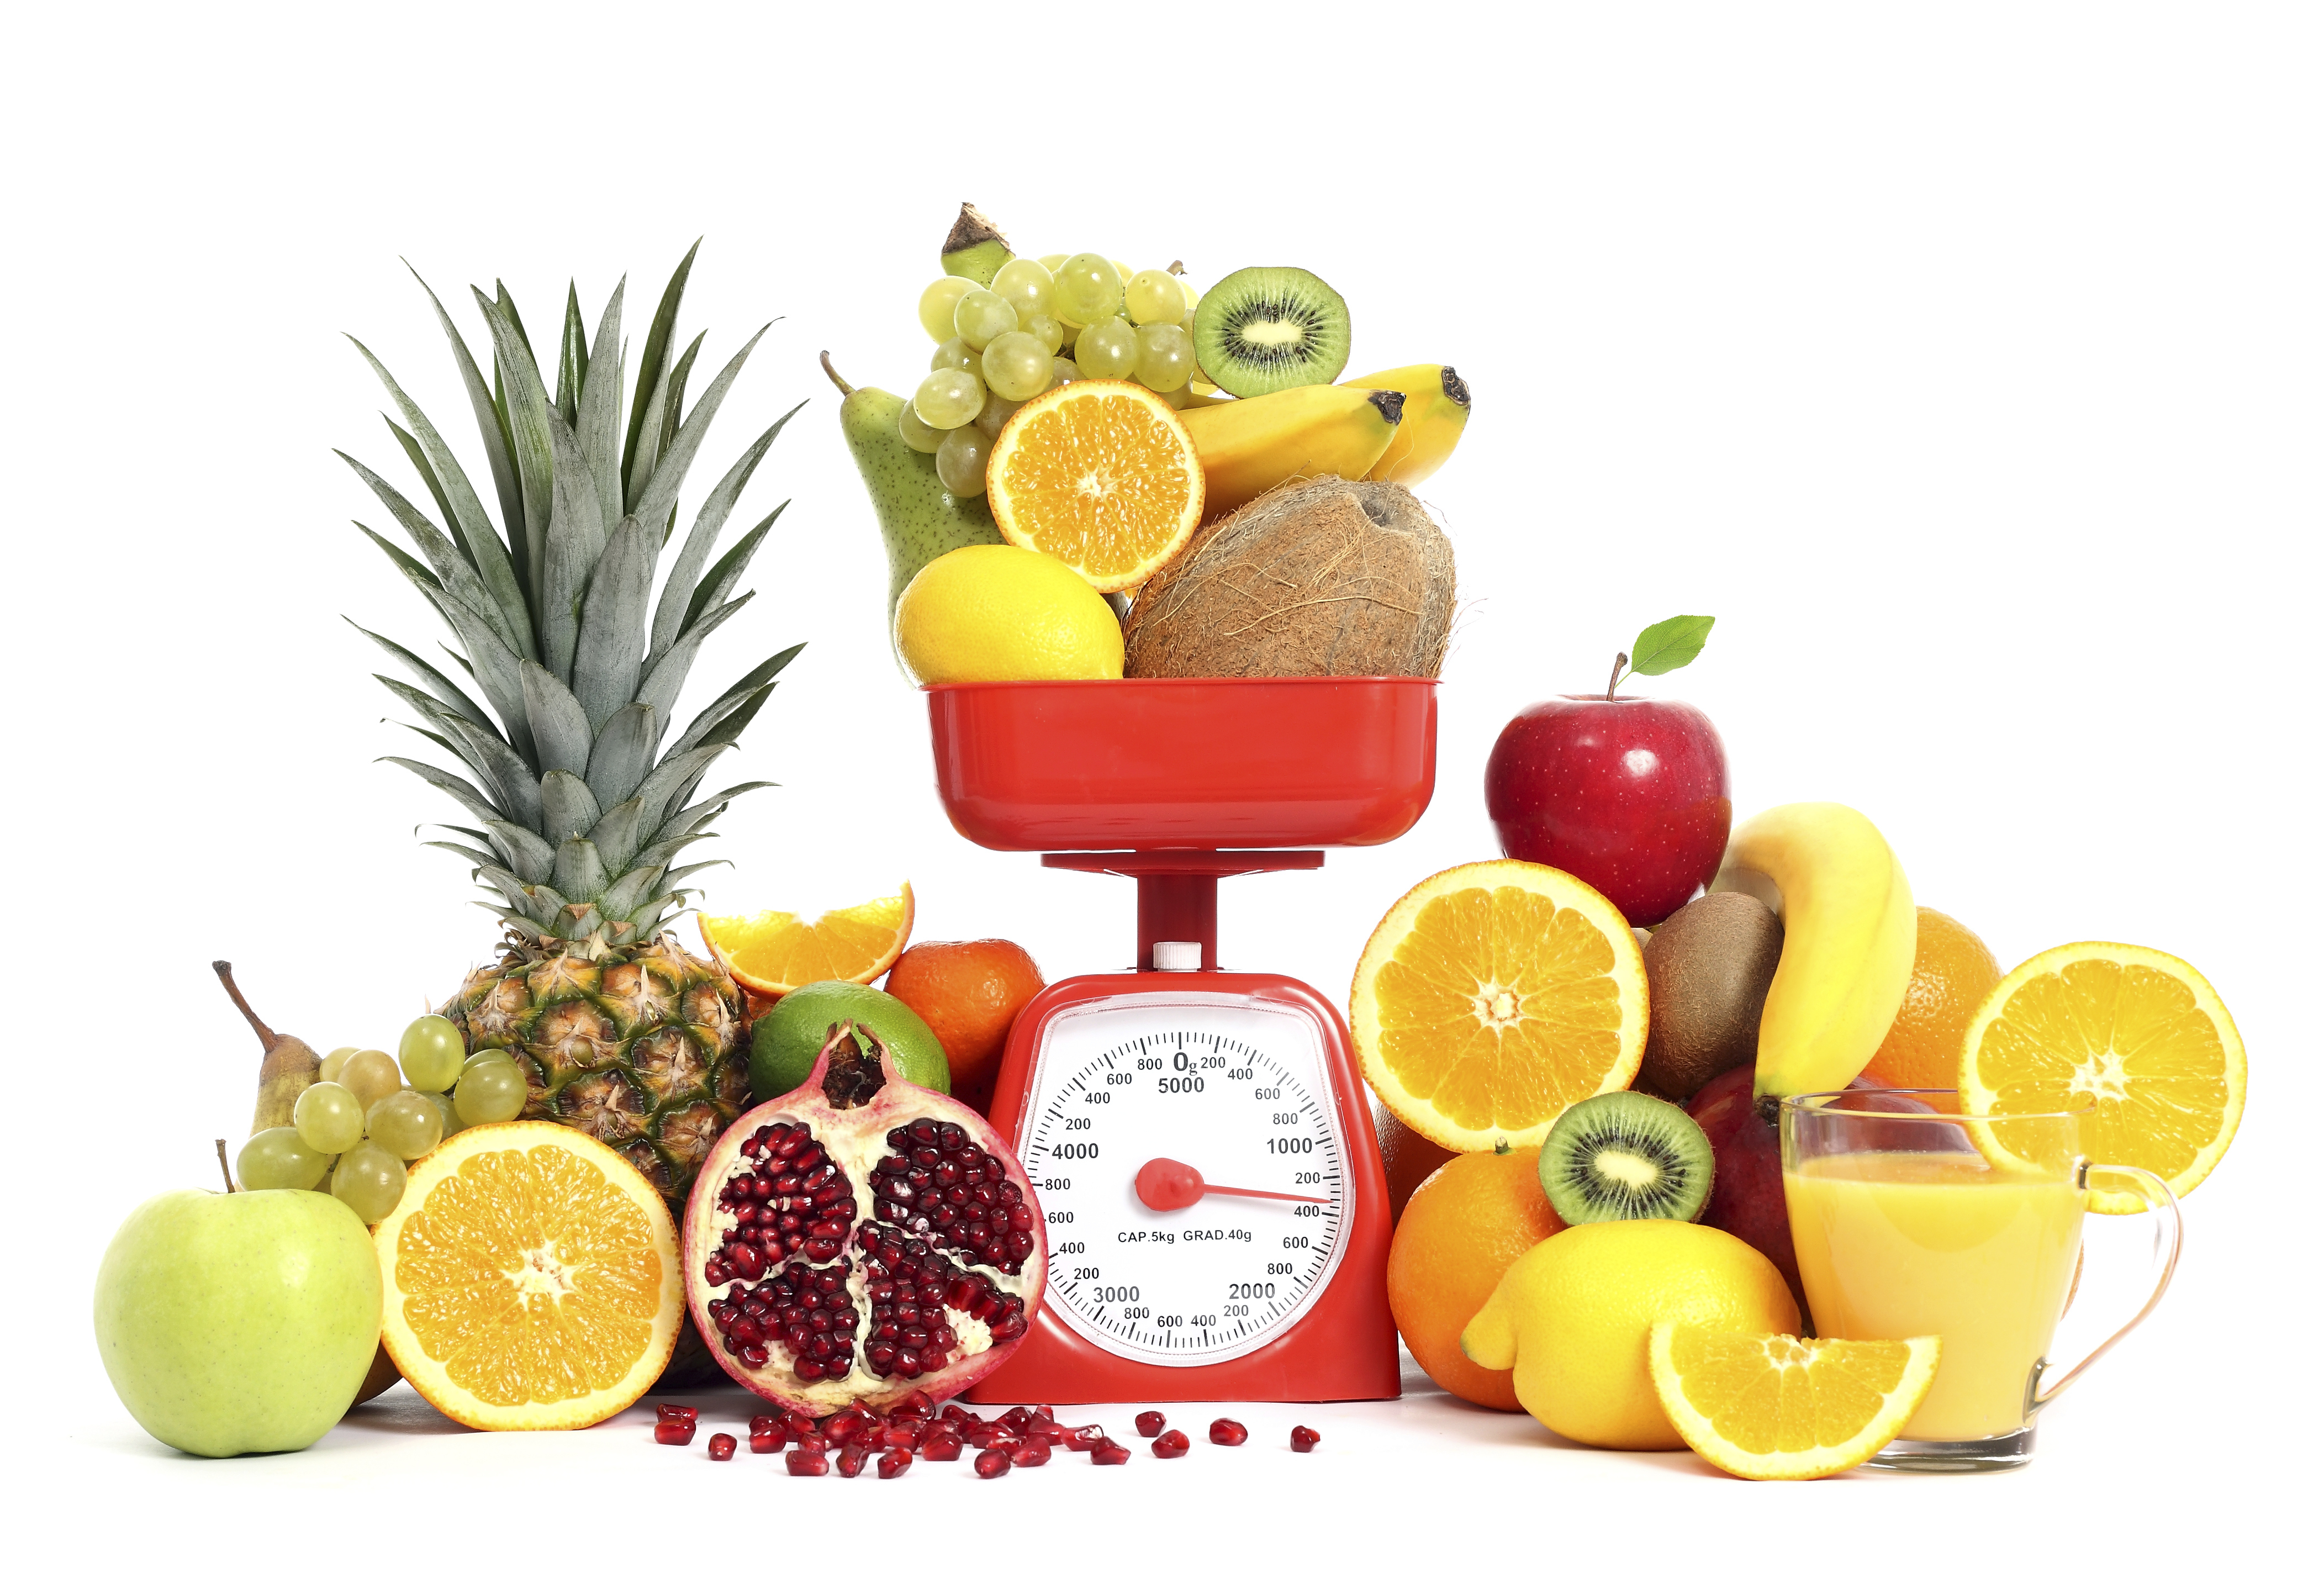 How Using a Food Scale Can Help with Weight Loss